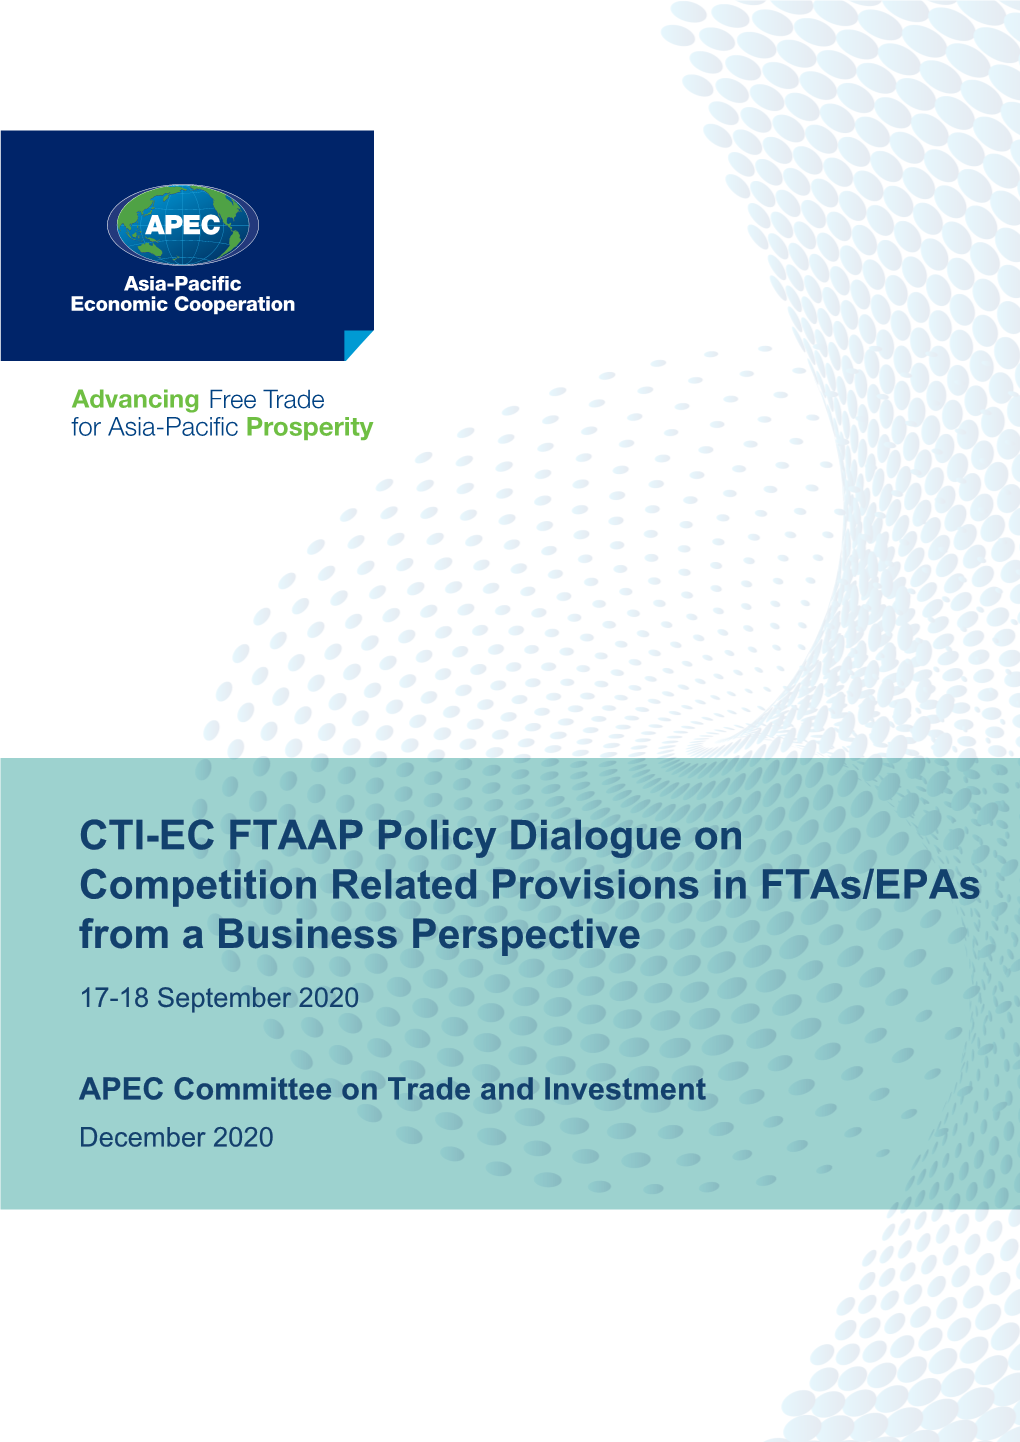 CTI-EC FTAAP Policy Dialogue on Competition Related Provisions in Ftas/Epas from a Business Perspective 17-18 September 2020